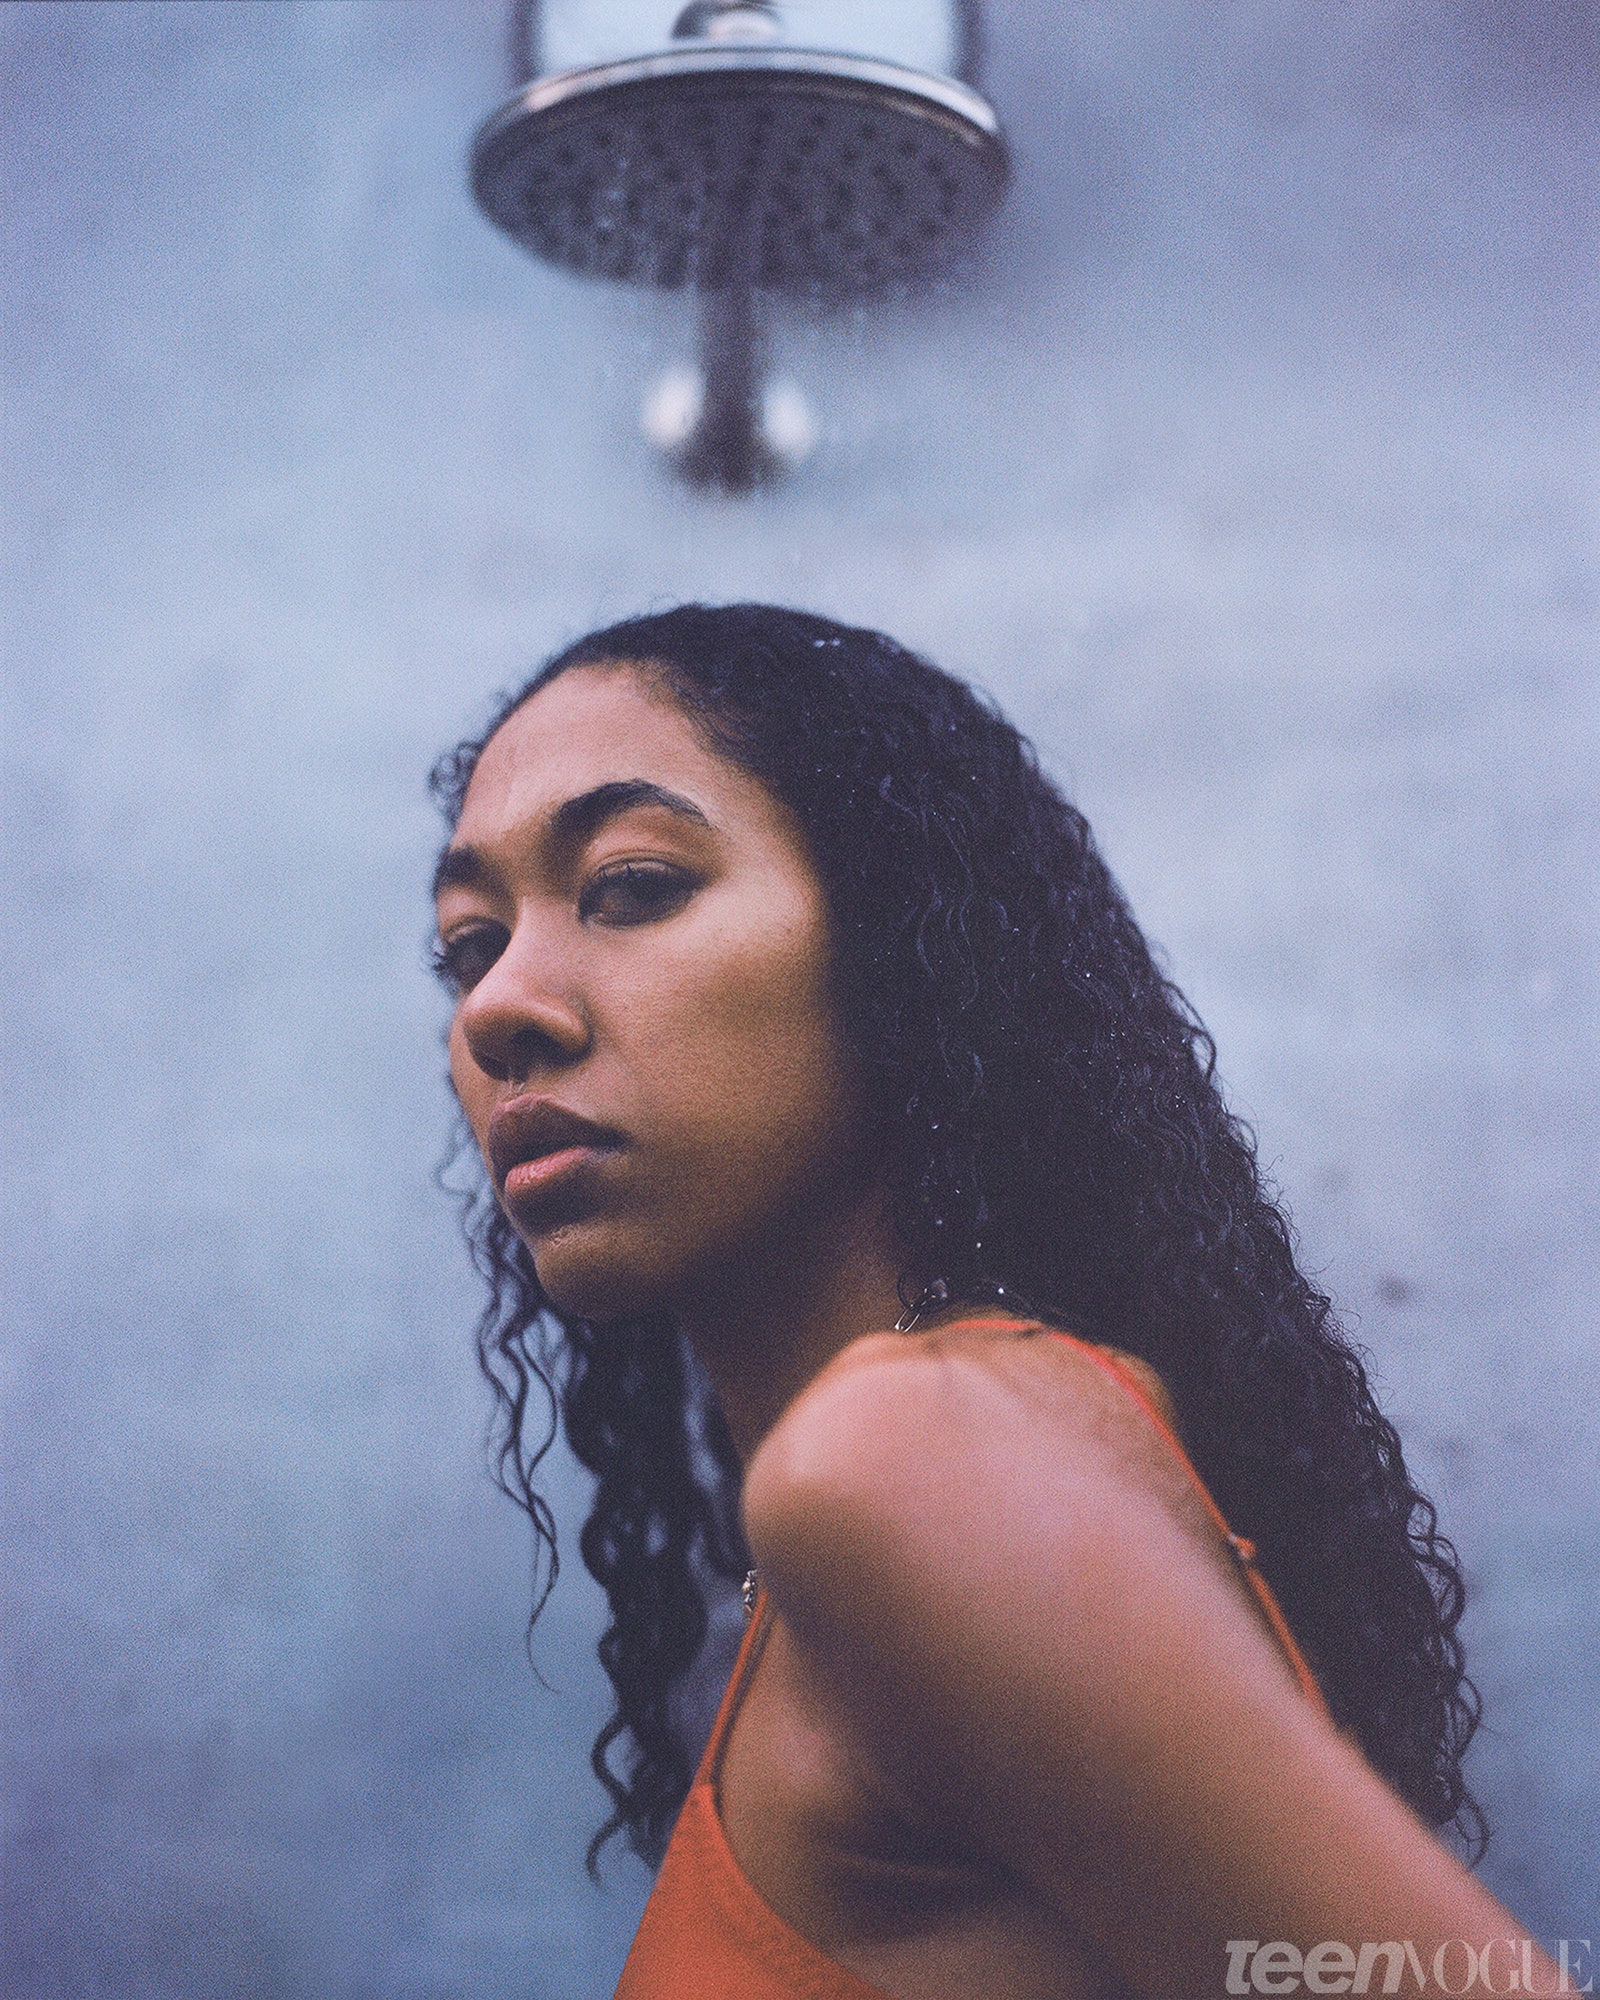 Aoki Lee Simmons standing under a shower head.